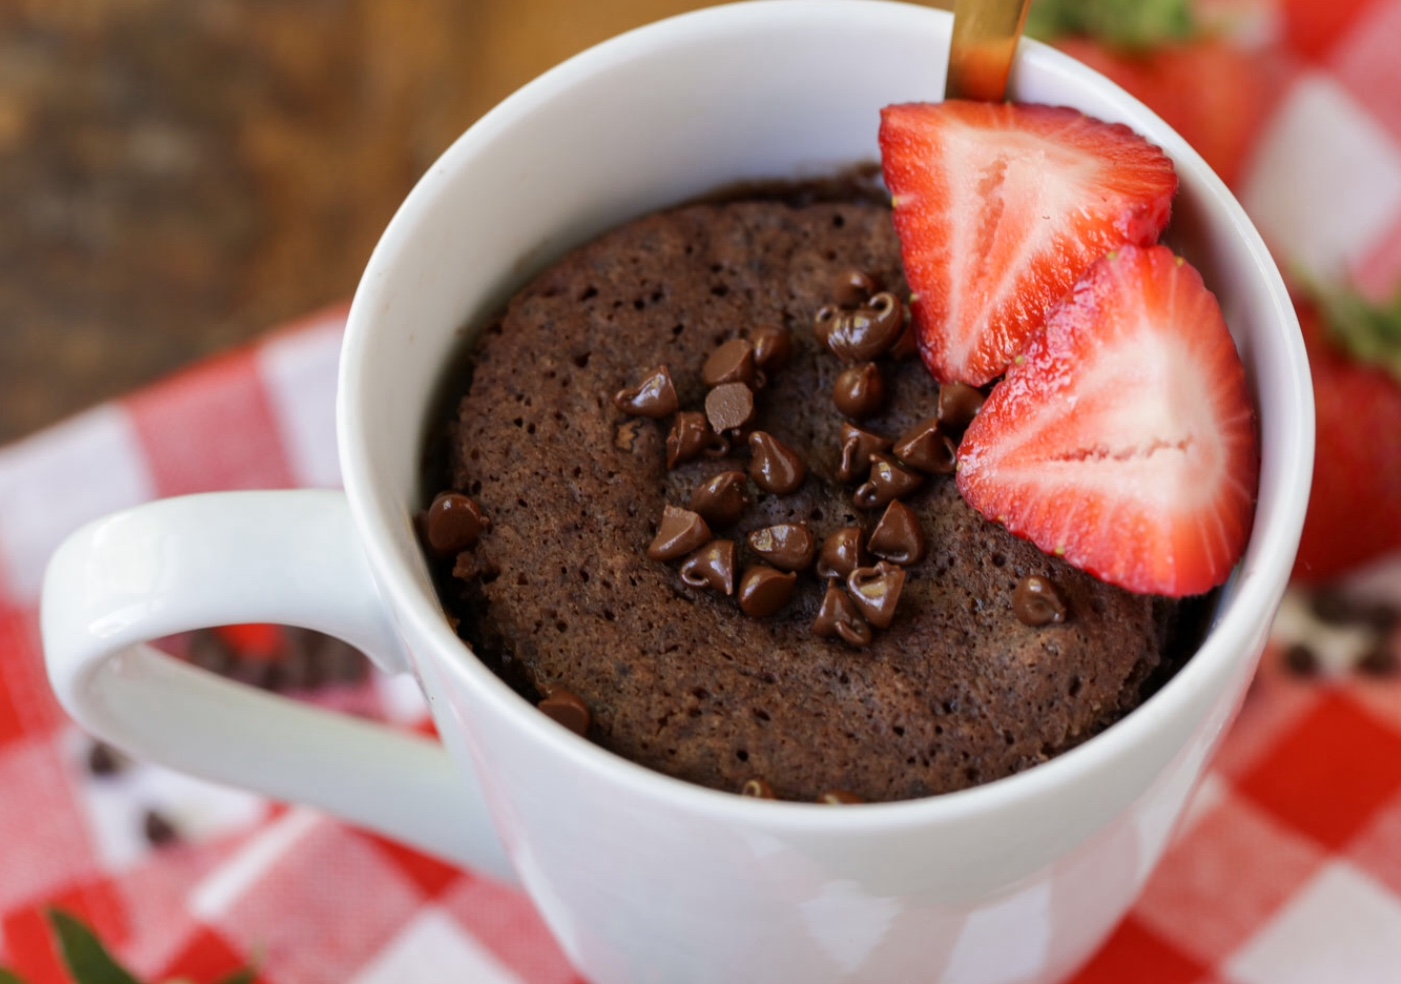 A cup of chocolate cake with strawberries on top.